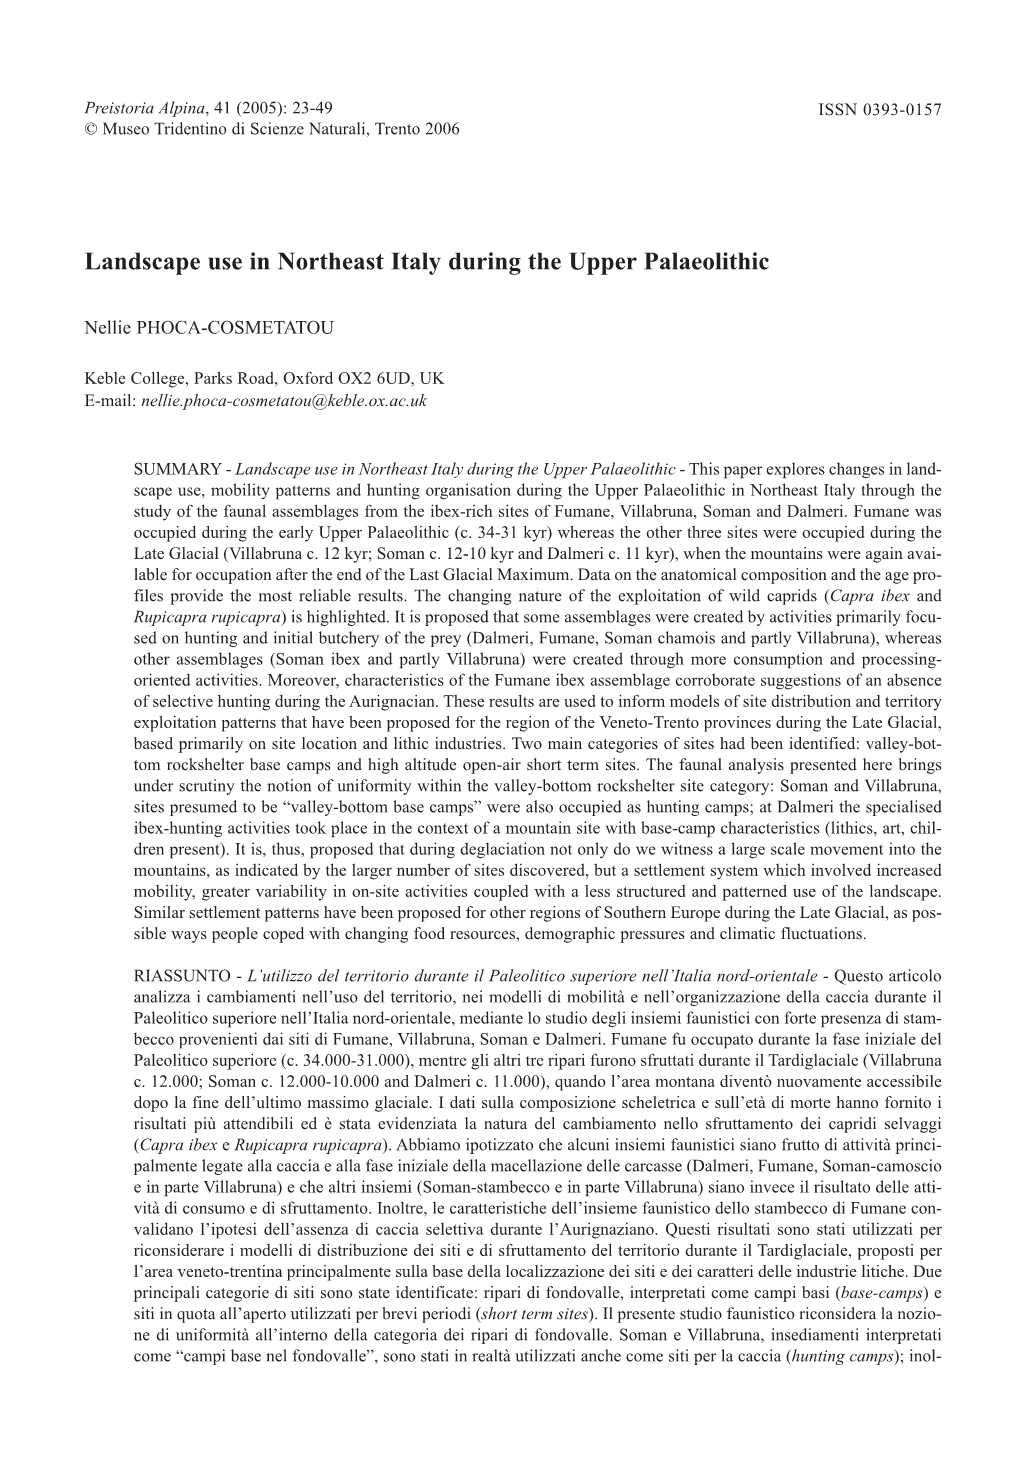 Landscape Use in Northeast Italy During the Upper Palaeolithic